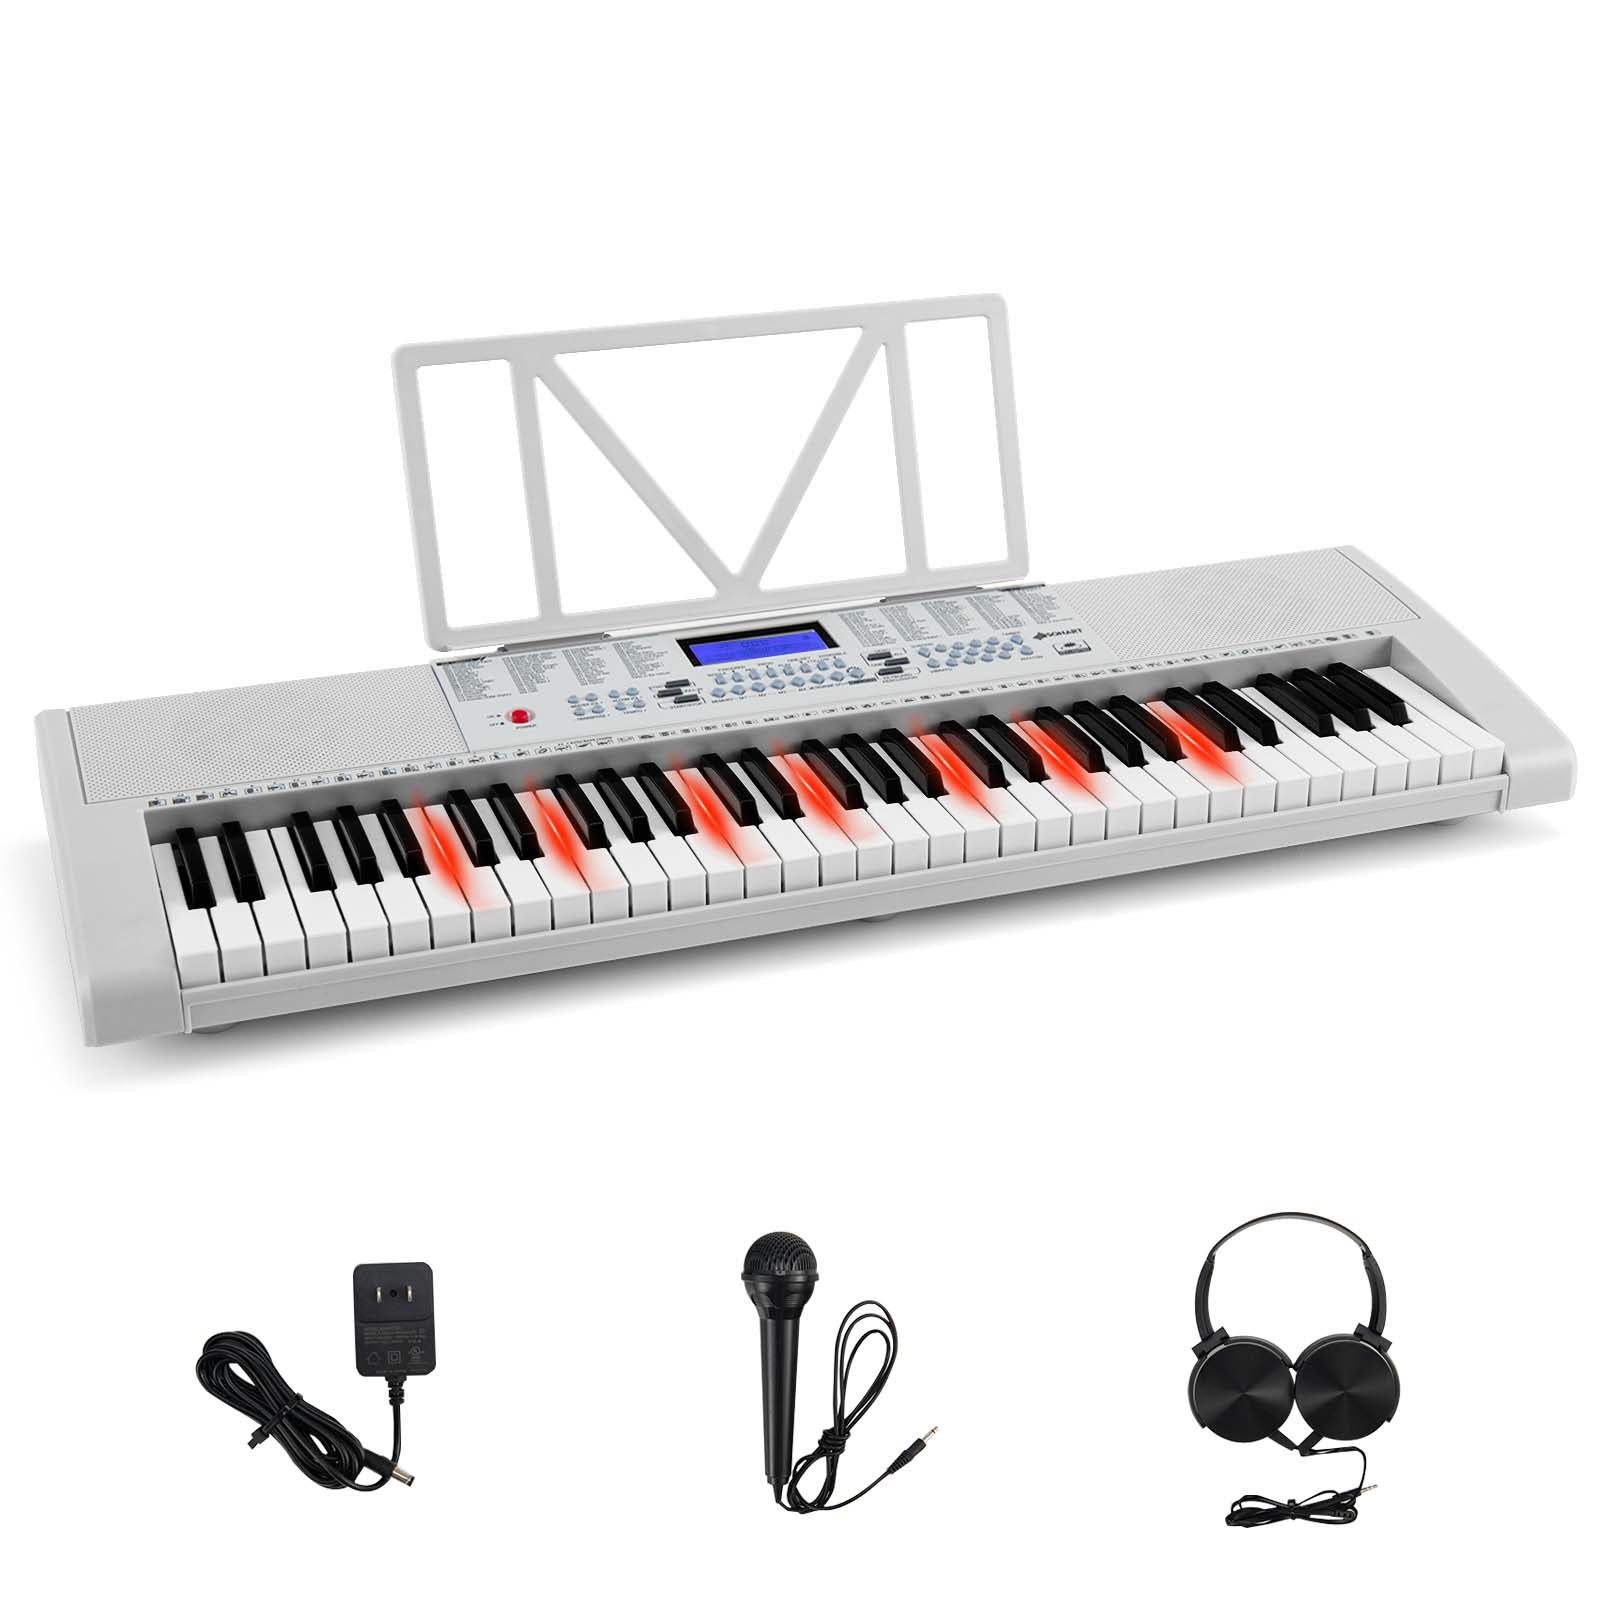 Musical Excellence: 61-Key White Electric Piano with Portable Digital Keyboard and Music Stand